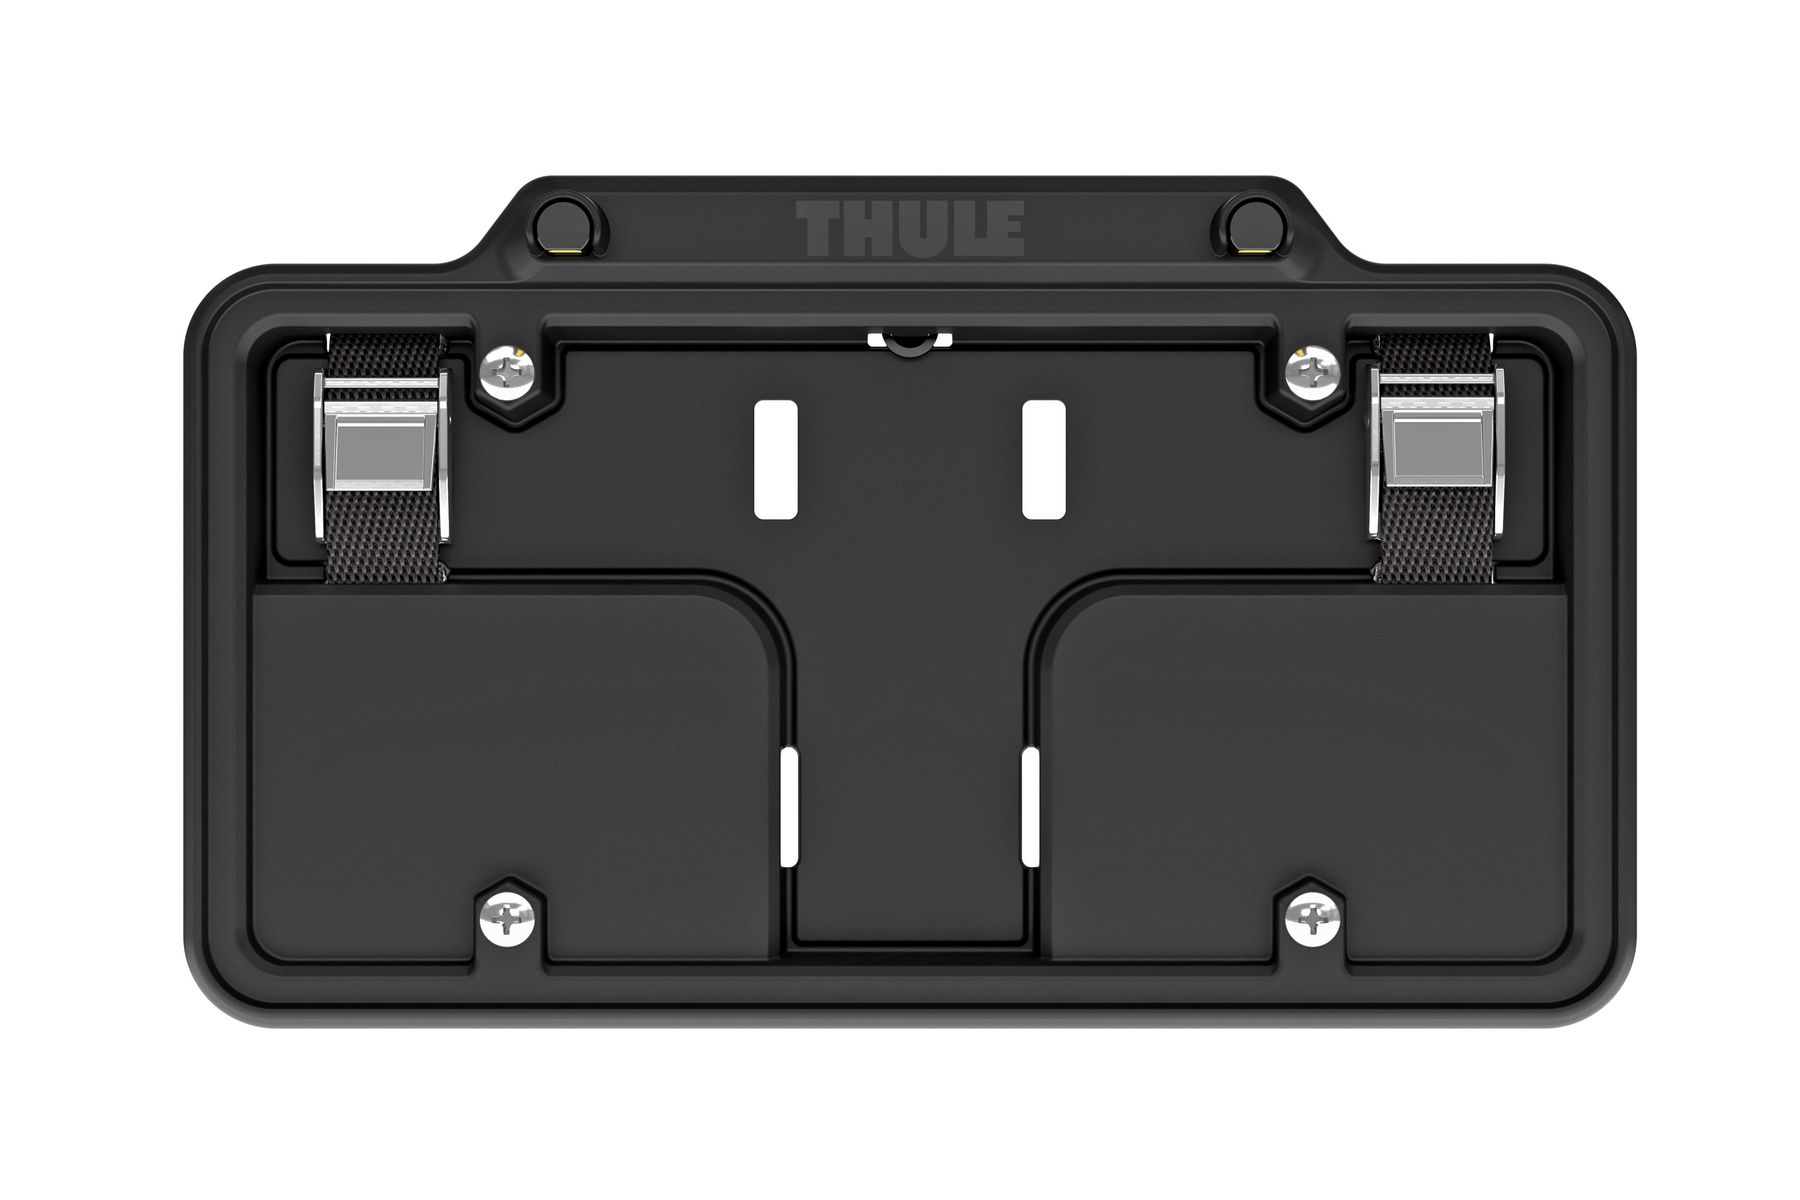 Thule License Plate Holder 903760 front